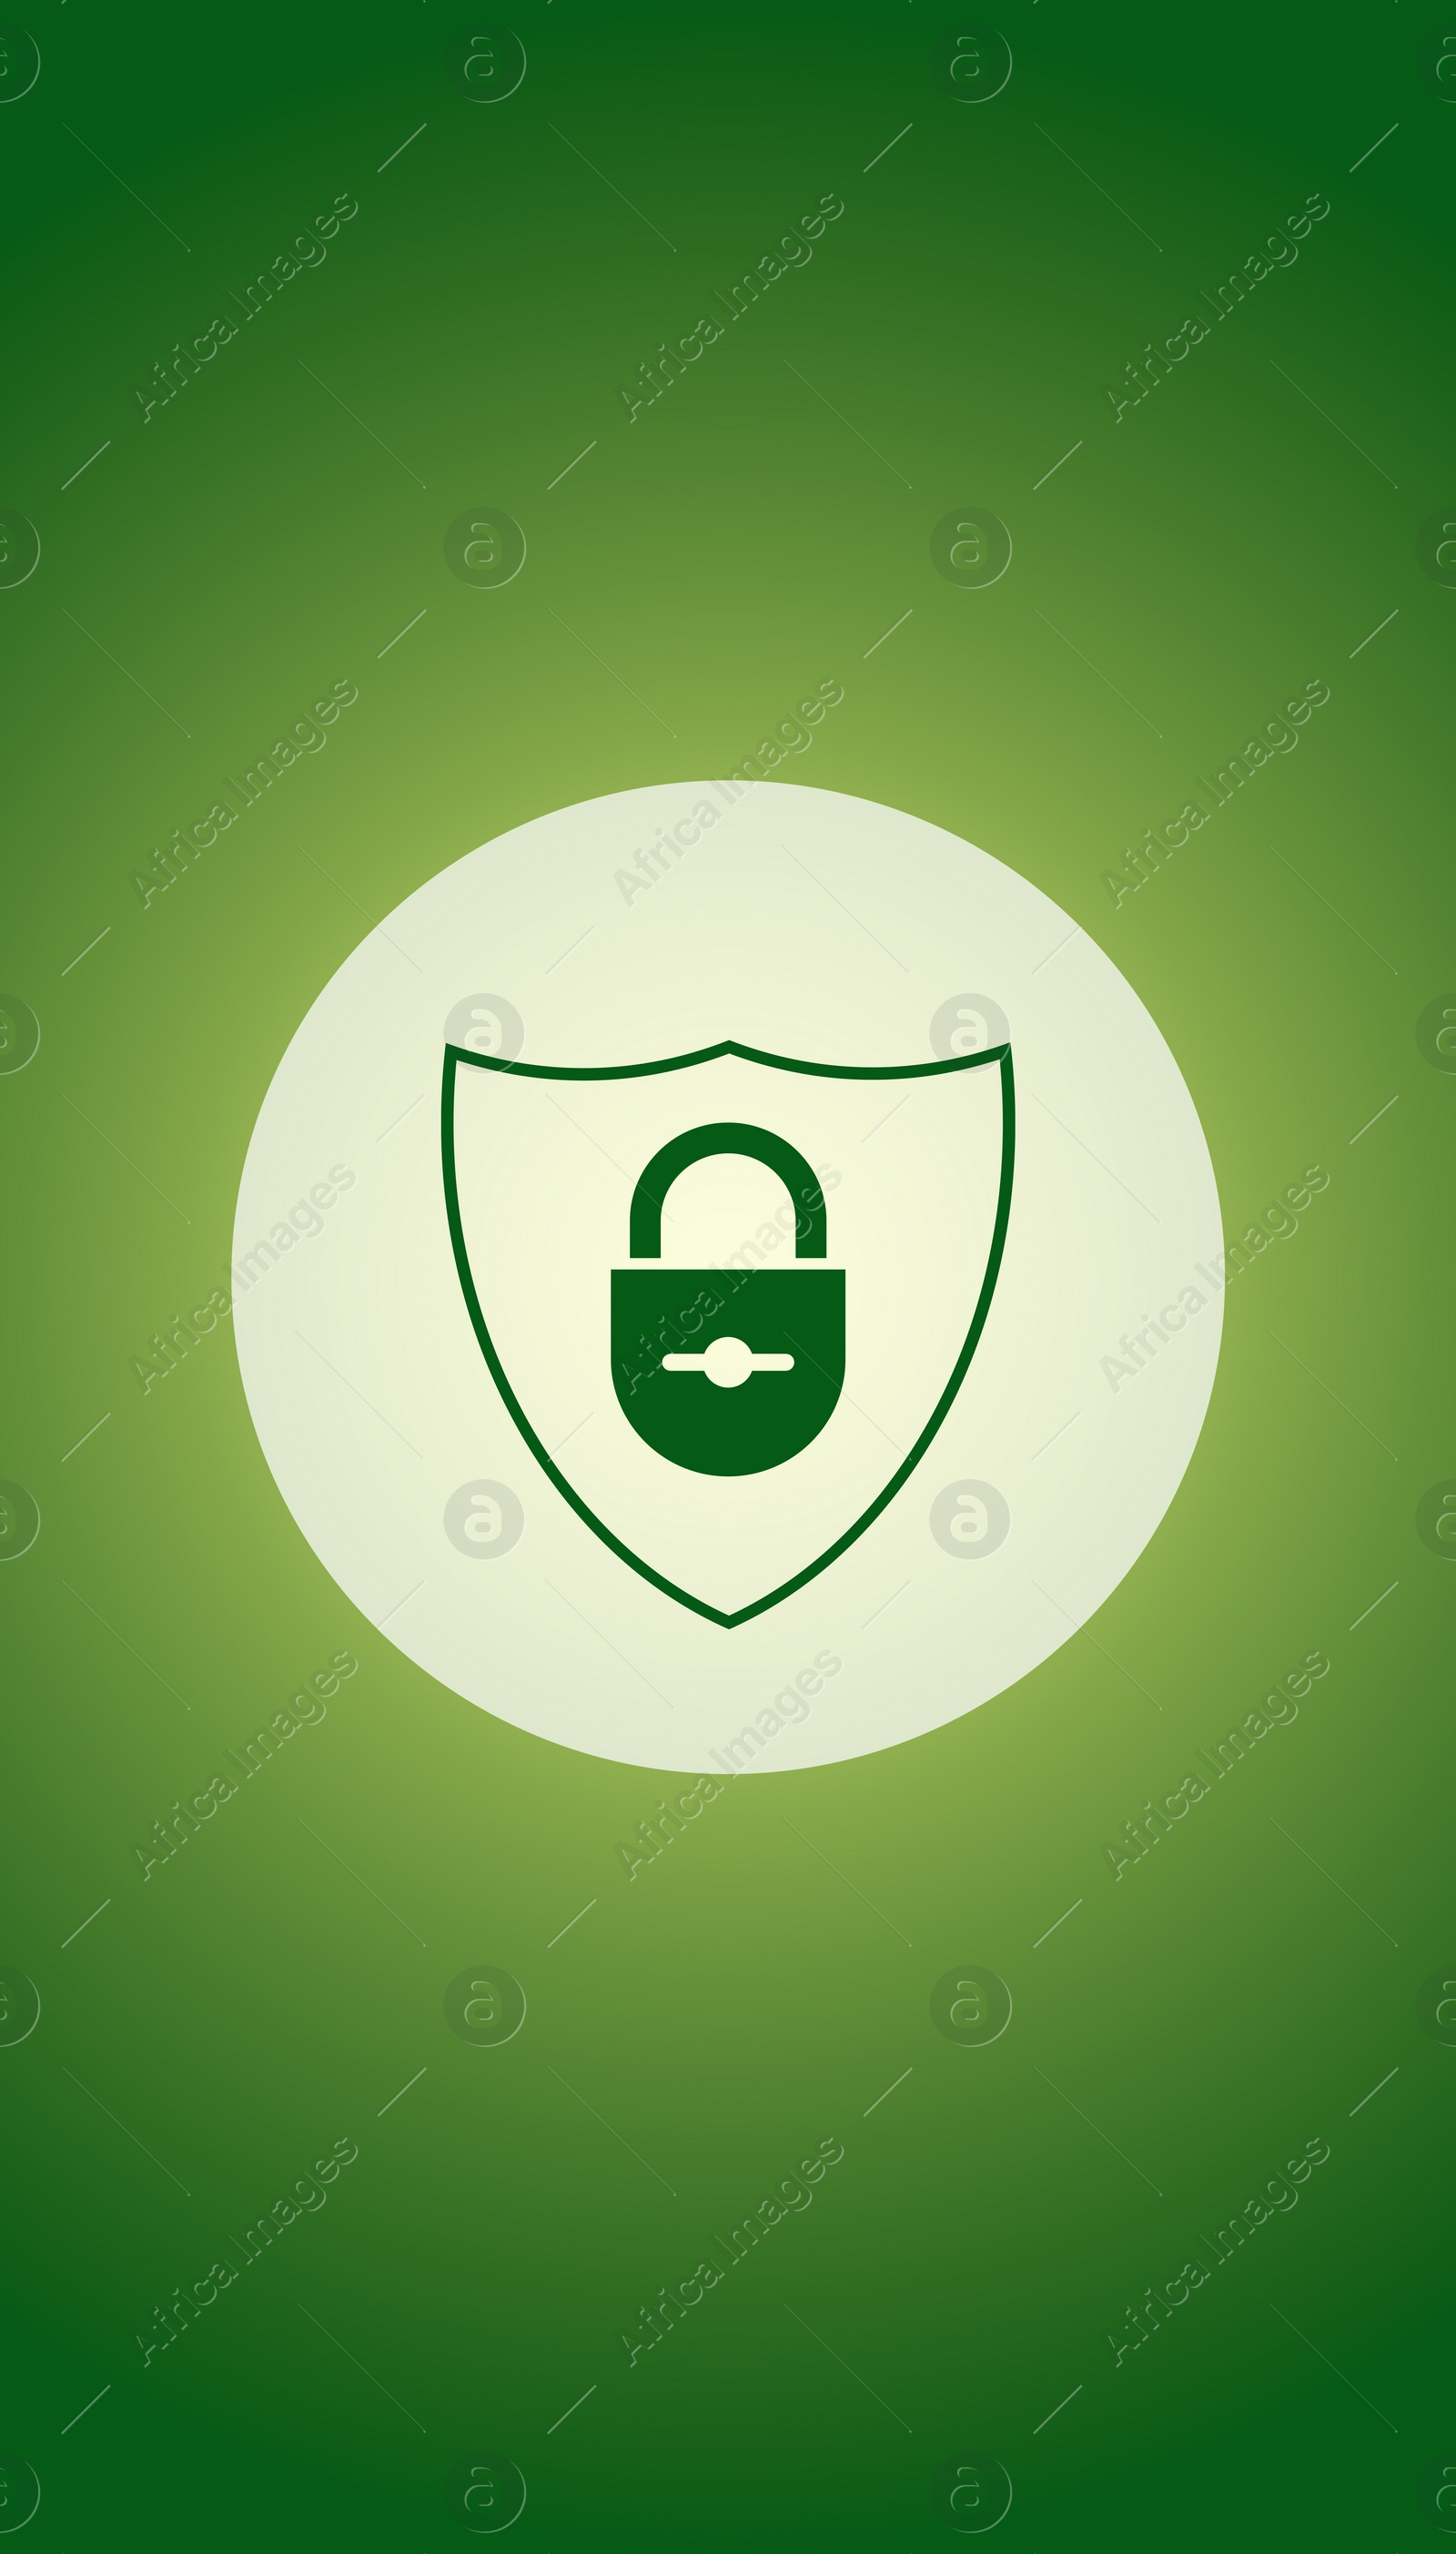 Illustration of Home alarm system.  closed padlock in shield on green background